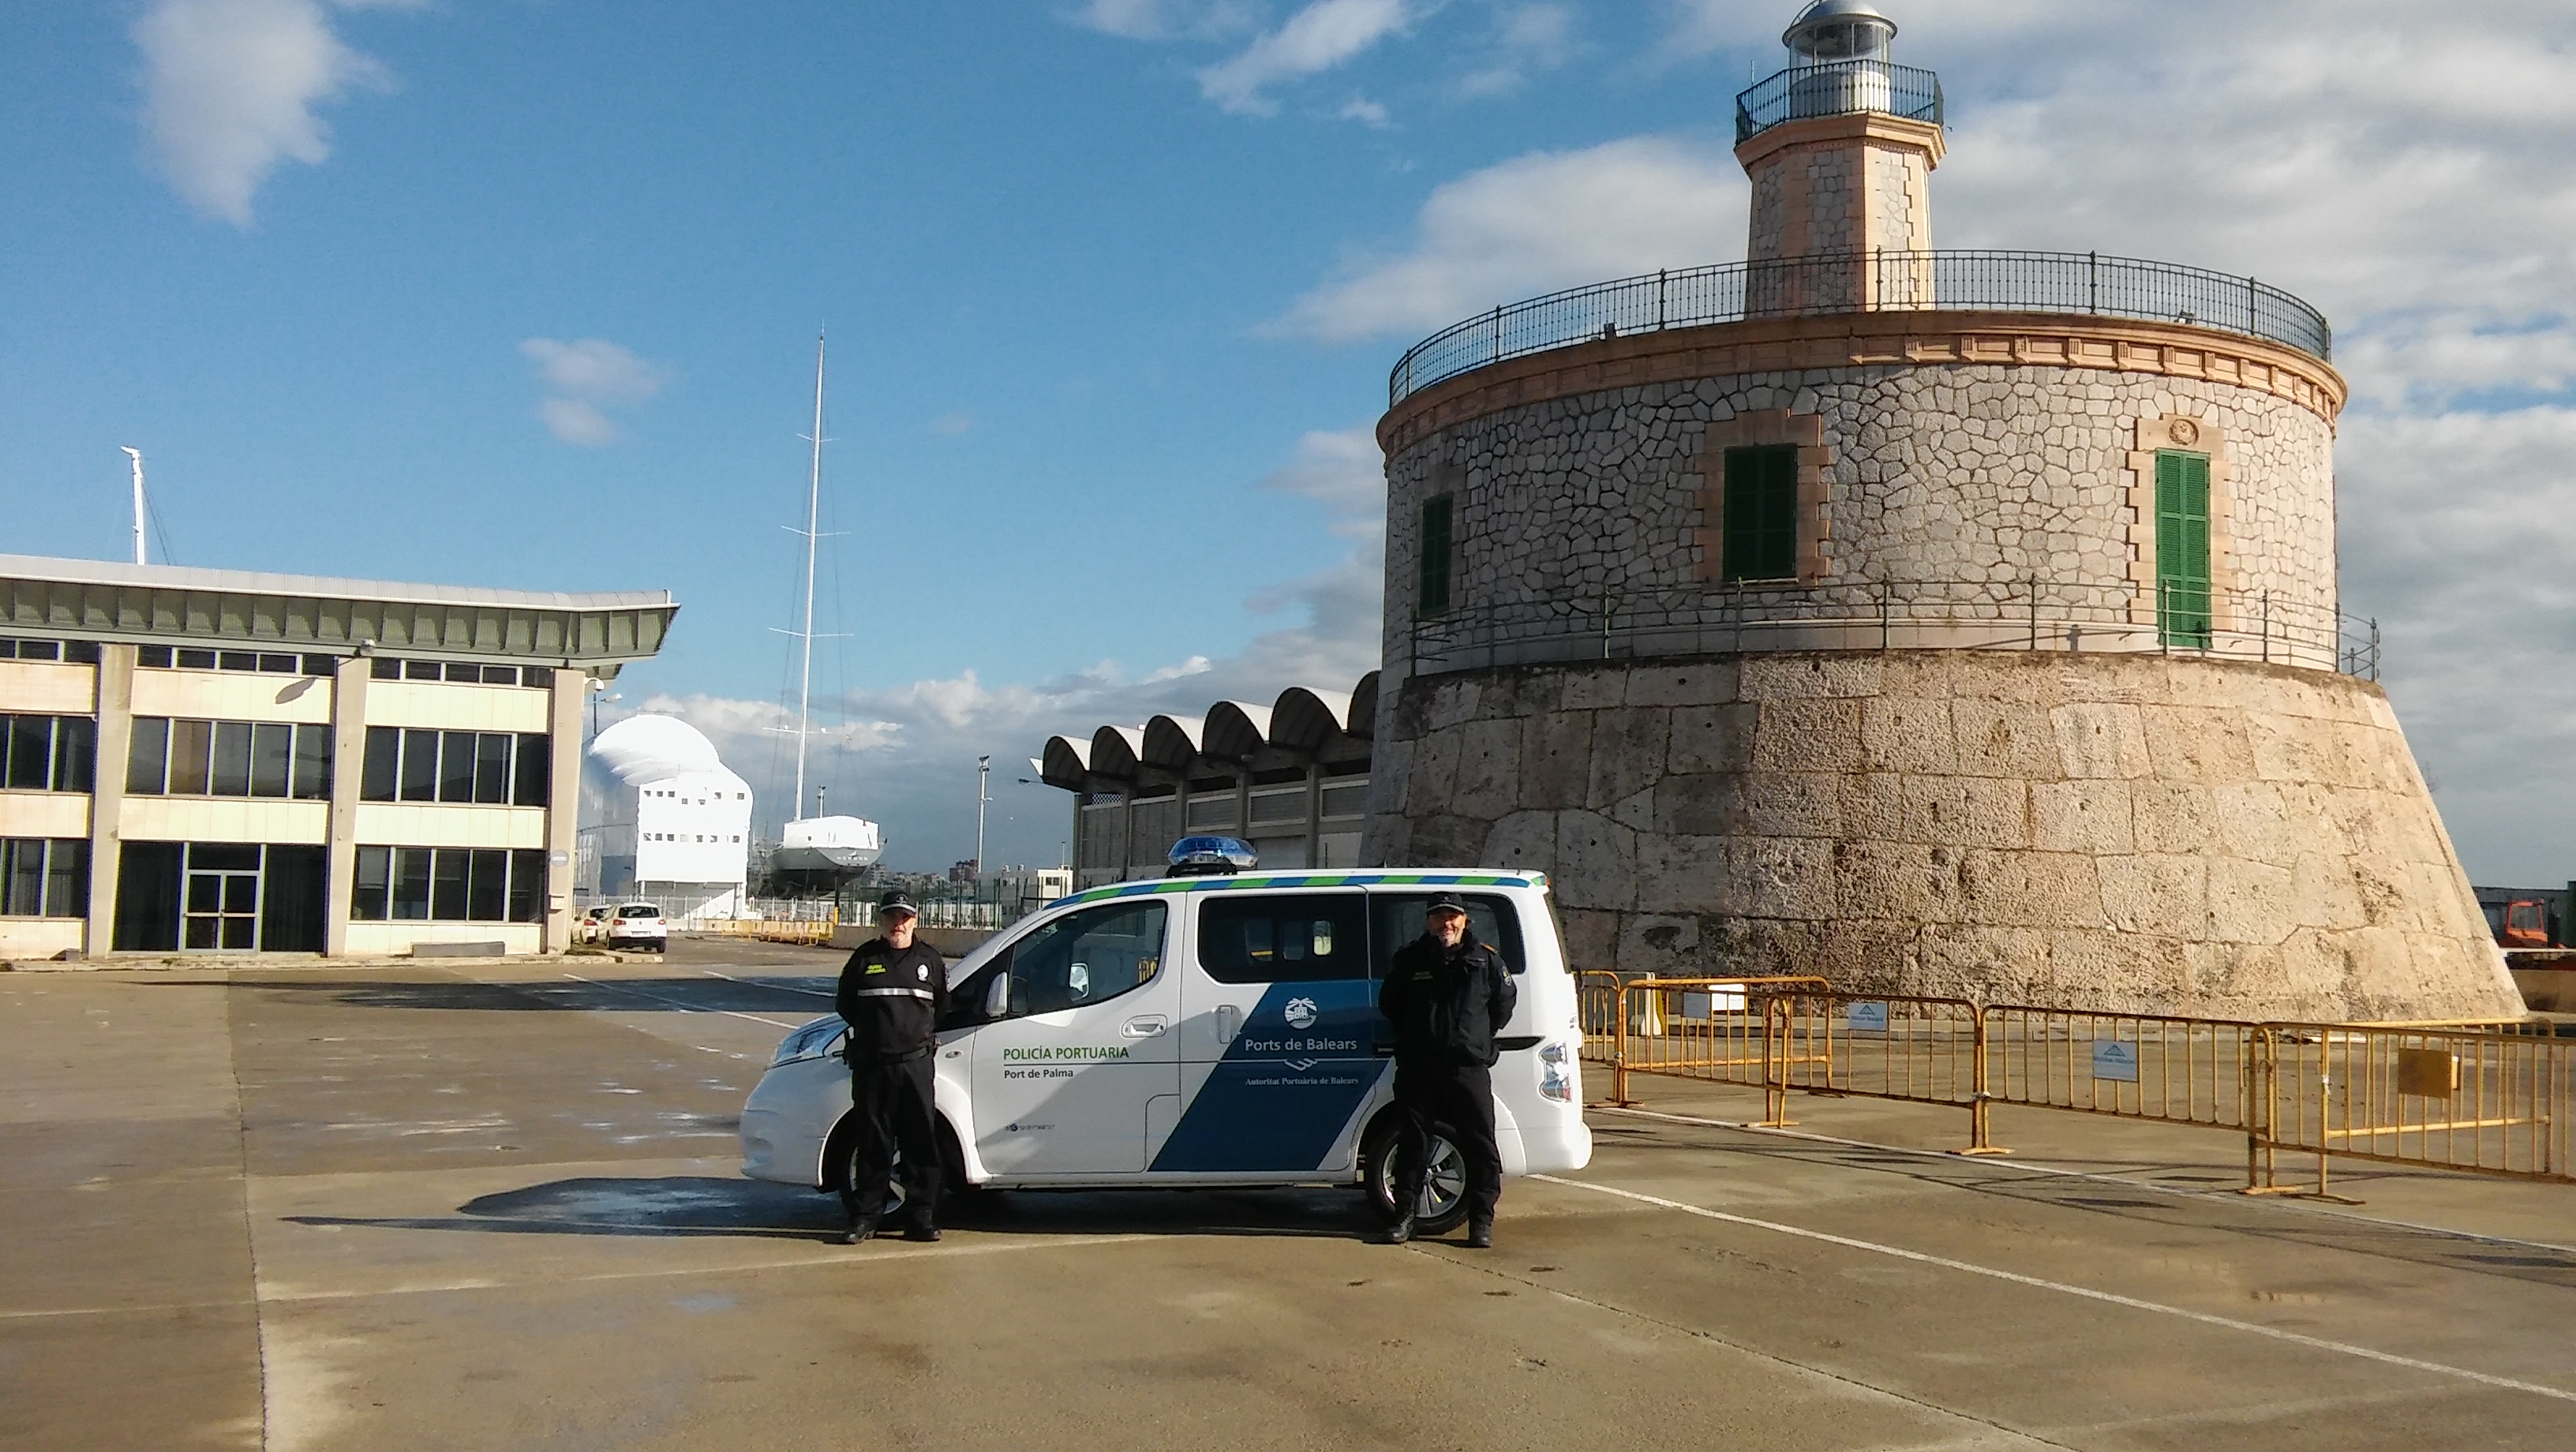 The APB purchases a new 100% electric vehicle for the Port Police at the Port of Palma